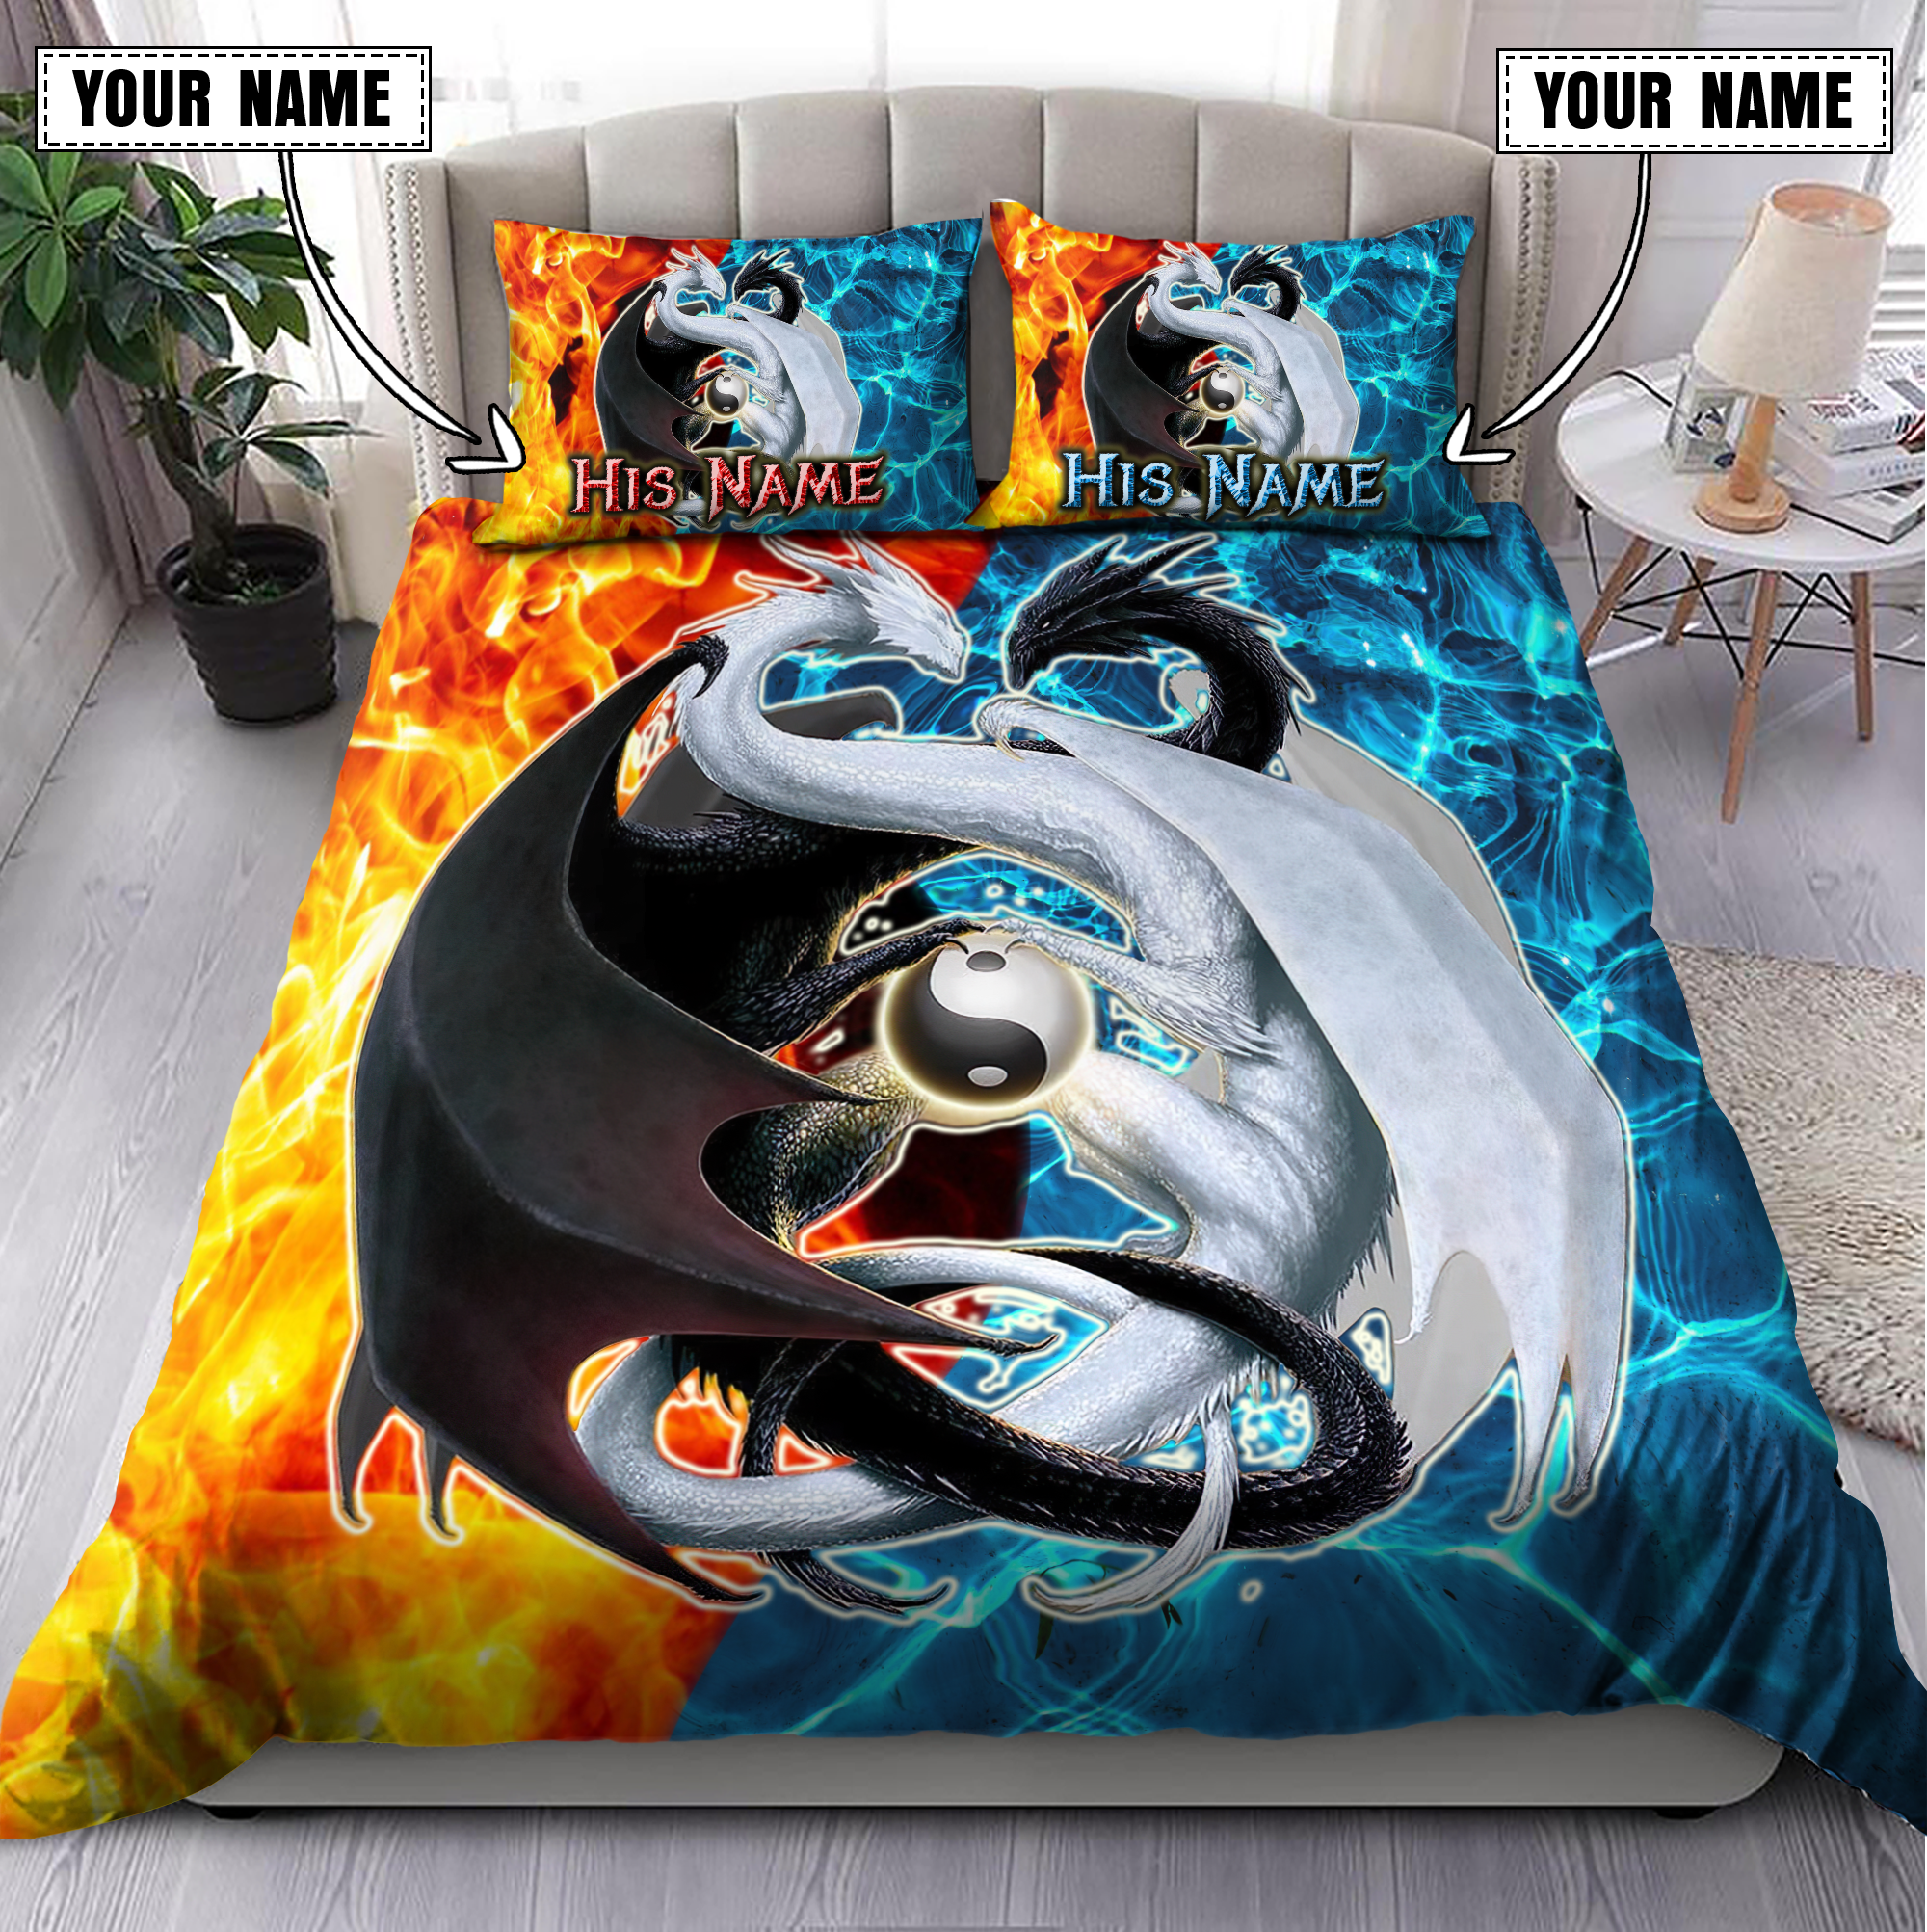 Couple Ice And Fire Dragon Custom Name Quilt Bedding Set 1